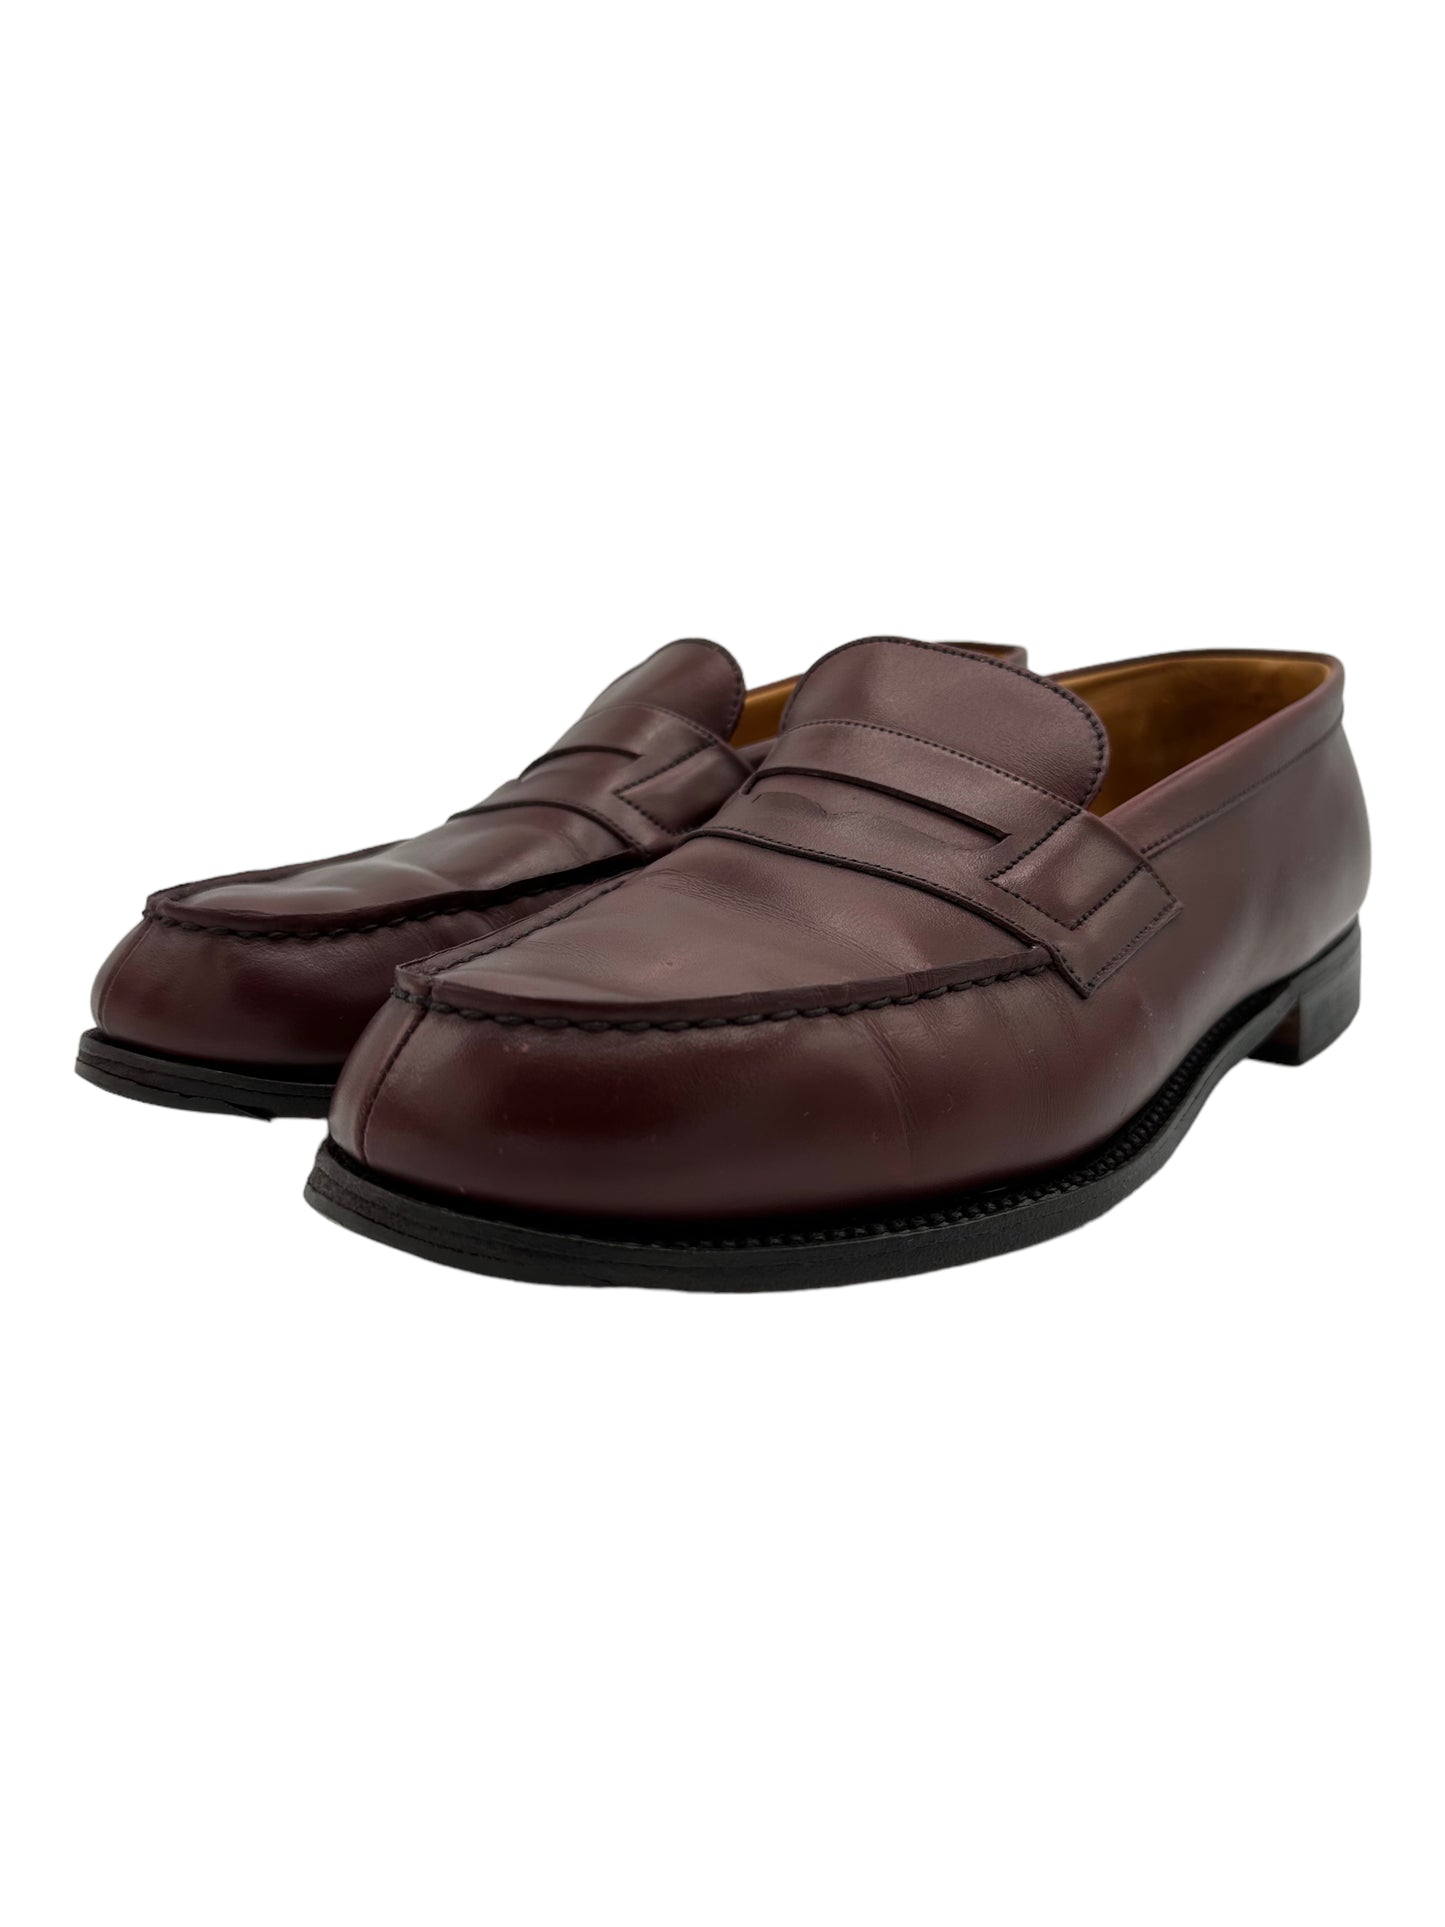 J.M. Weston Burgundy 180 Leather Penny Loafers